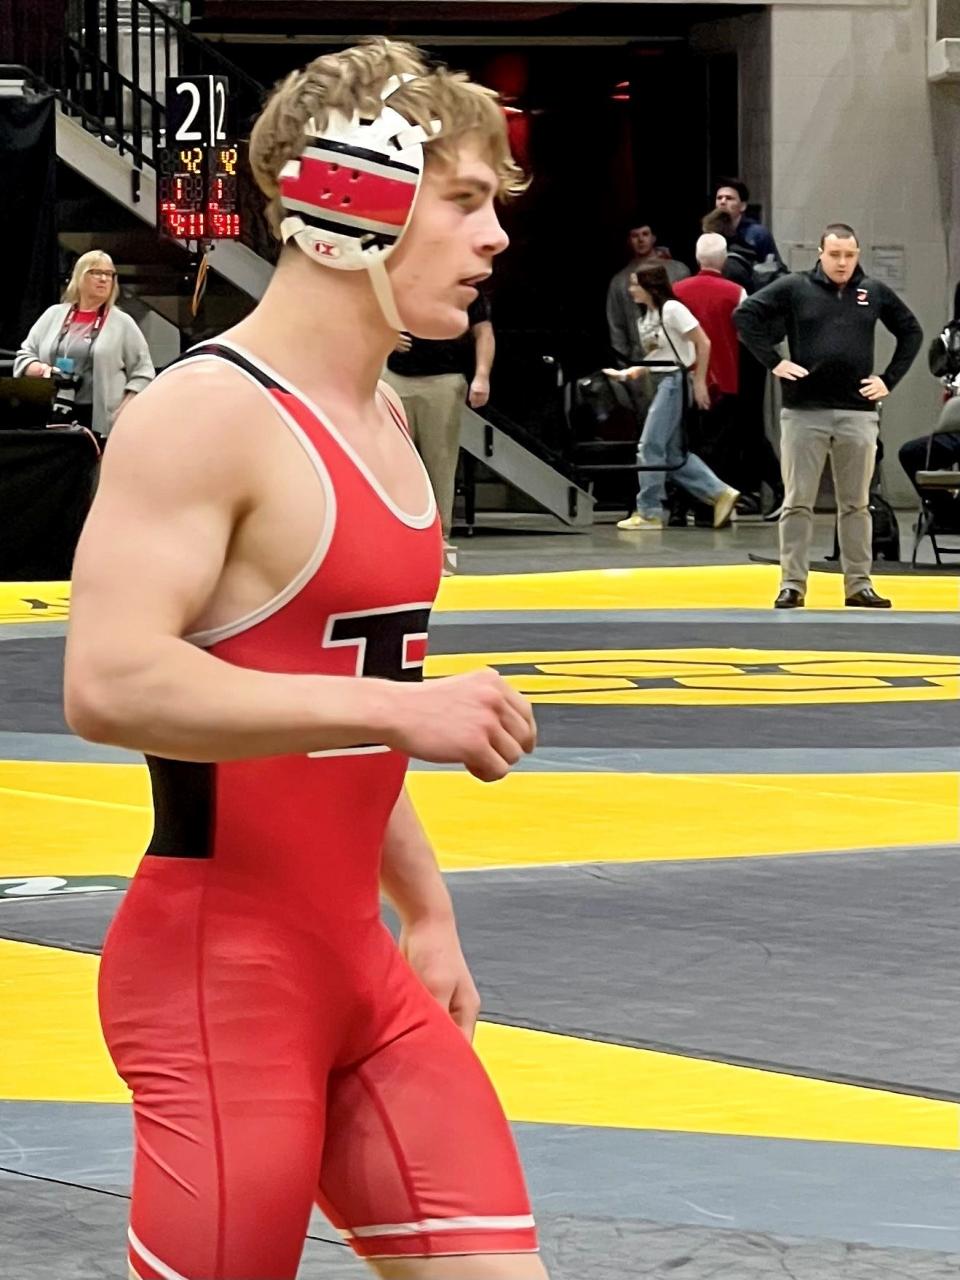 Pleasant's Daxton Chase gets ready for his 150-pound bout in Division III during the state wrestling tournament Friday at Ohio State's Schottenstein Center.